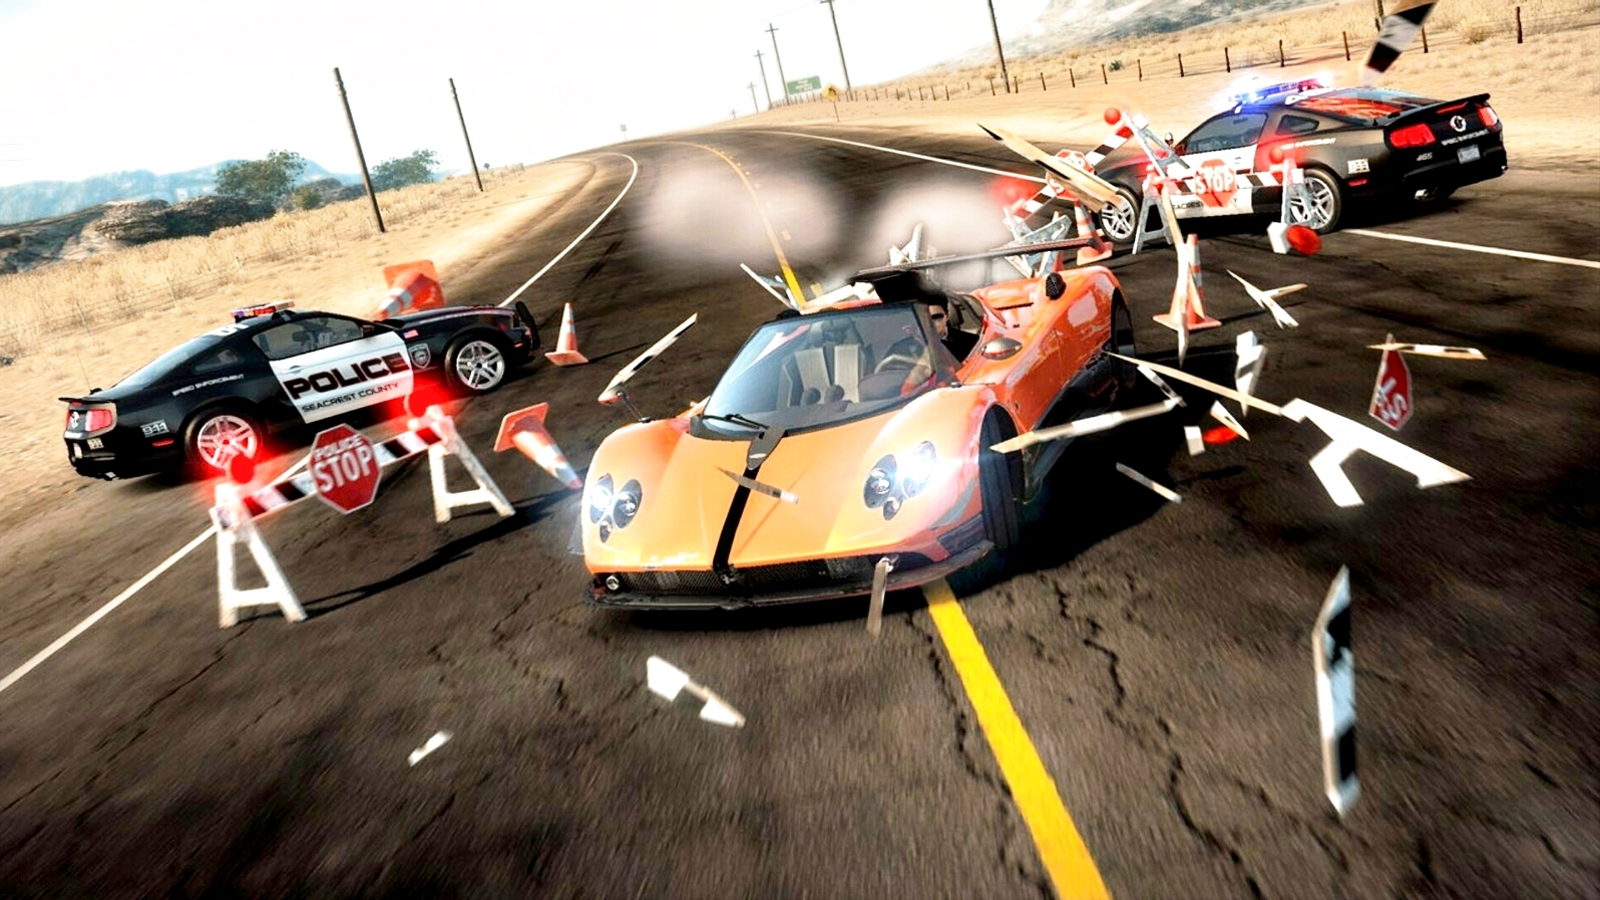 https://assetsio.reedpopcdn.com/need-for-speed-hot-pursuit-remastered-in-4k60fps-zeigt-sonys-ps5-im-vorteil-1614858389143.jpg?width=1600&height=900&fit=crop&quality=100&format=png&enable=upscale&auto=webp